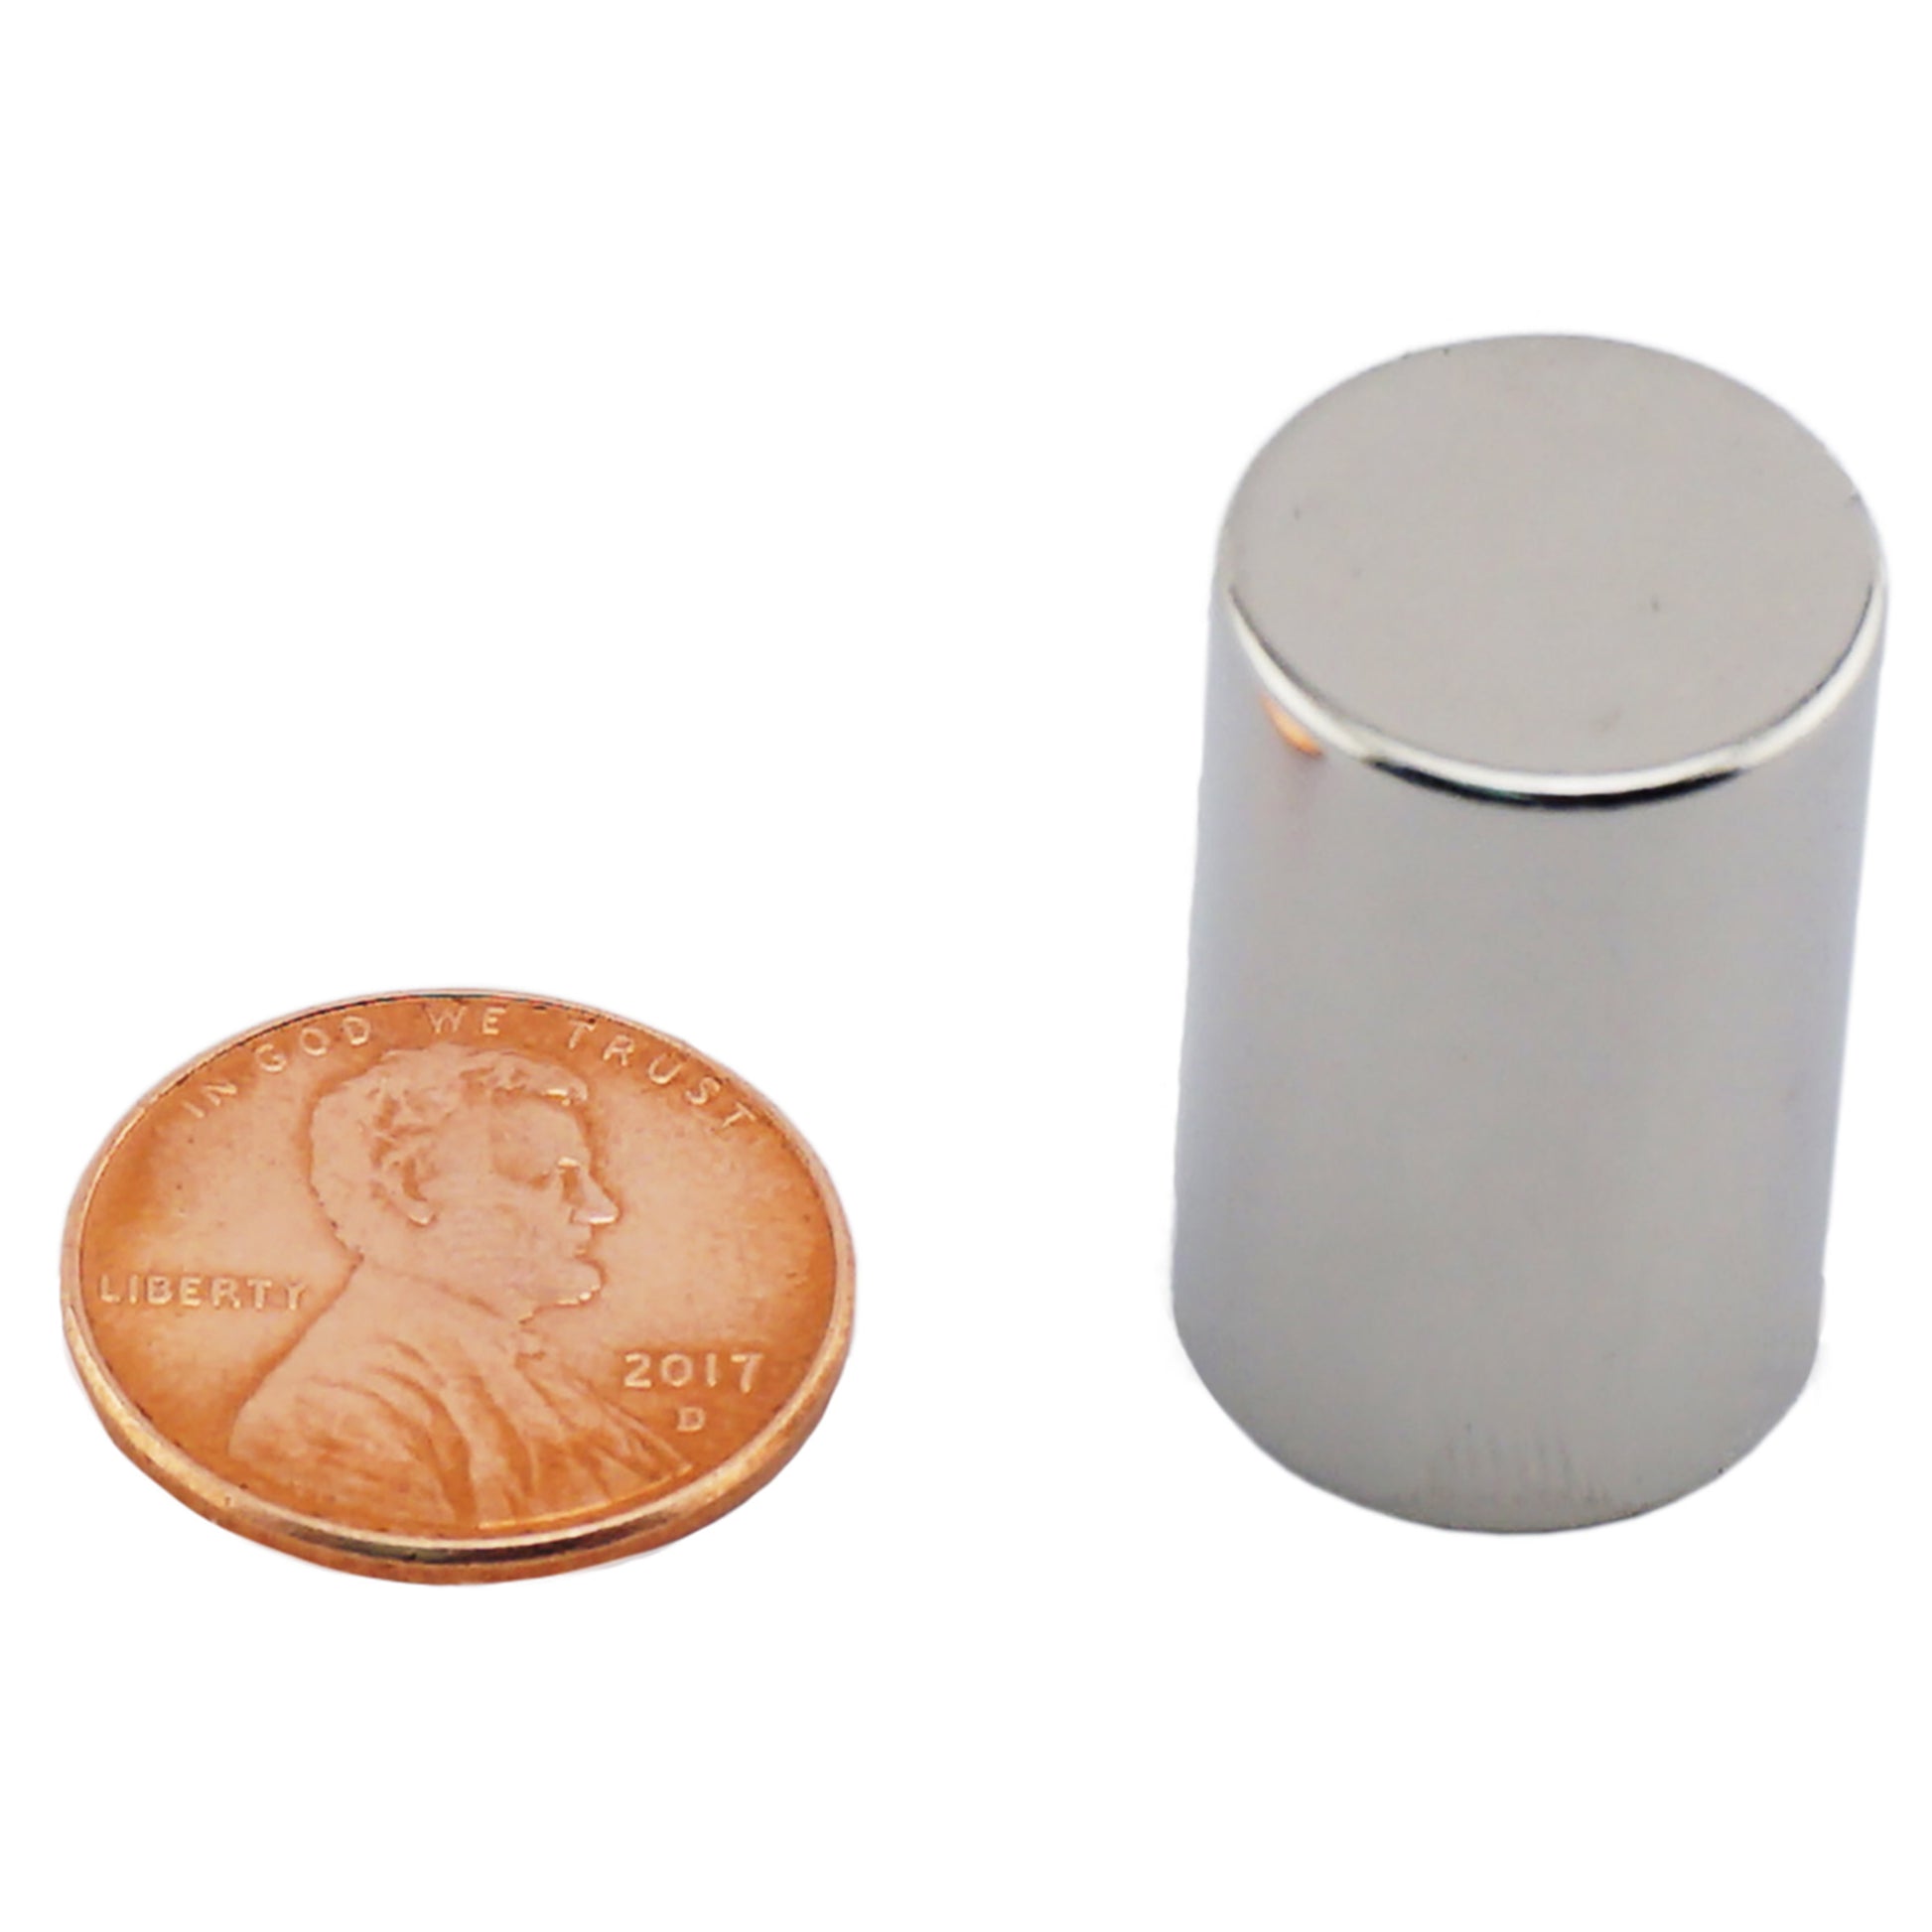 Load image into Gallery viewer, ND006213N Neodymium Disc Magnet - Compared to Penny for Size Reference